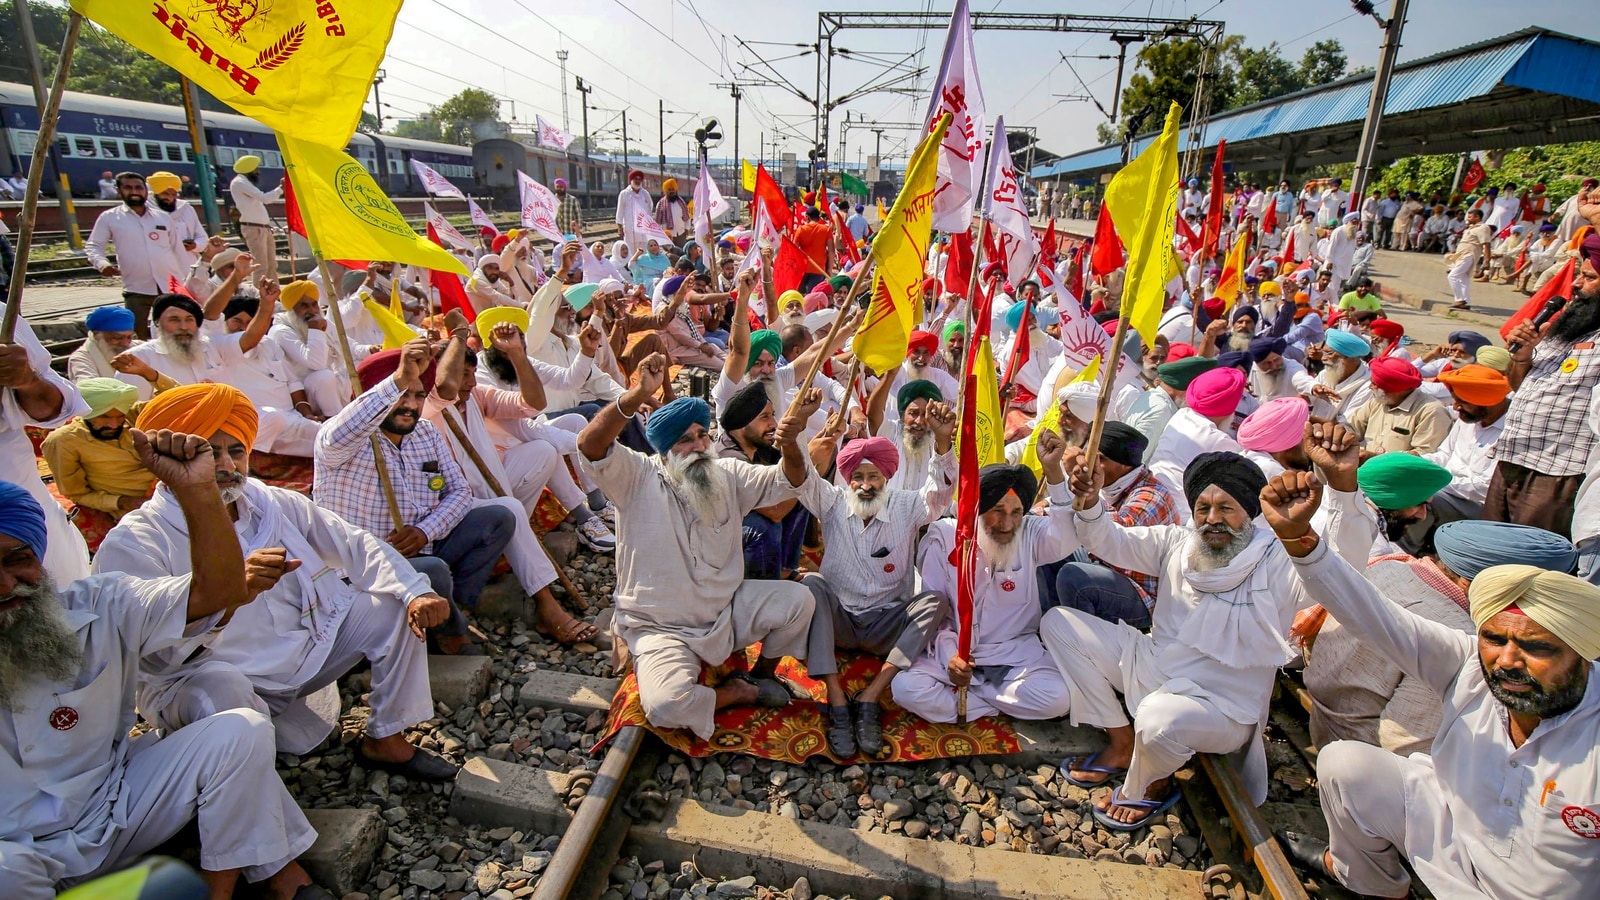 Farmers in Punjab demonstrate action in the Lakhimpur Kheri case by blocking rail tracks for three hours.